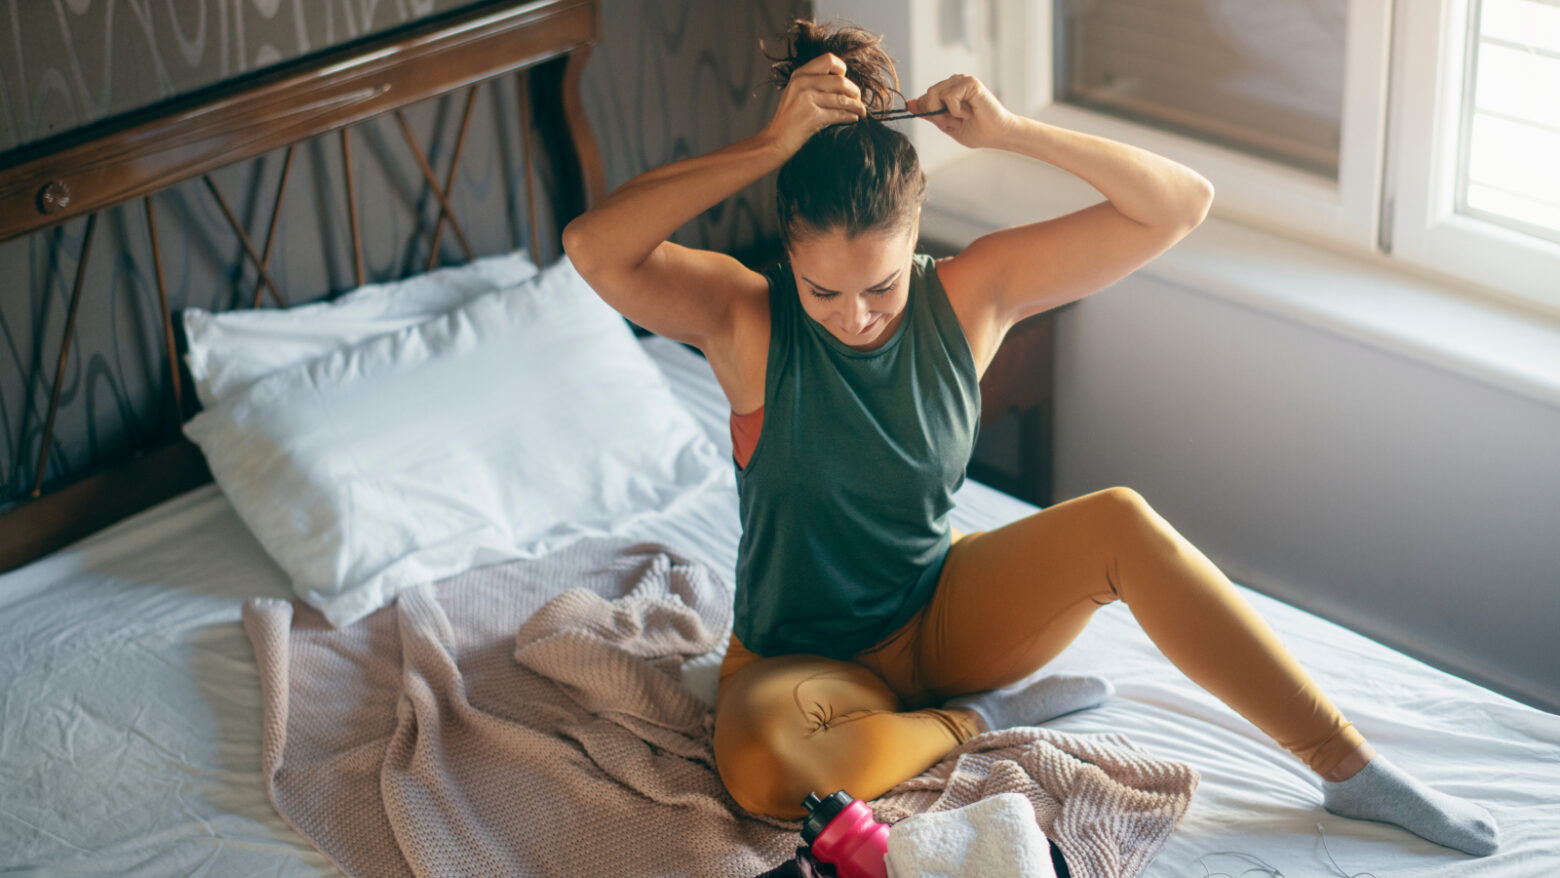 A woman ties up her hair while sitting on her bed in workout clothes